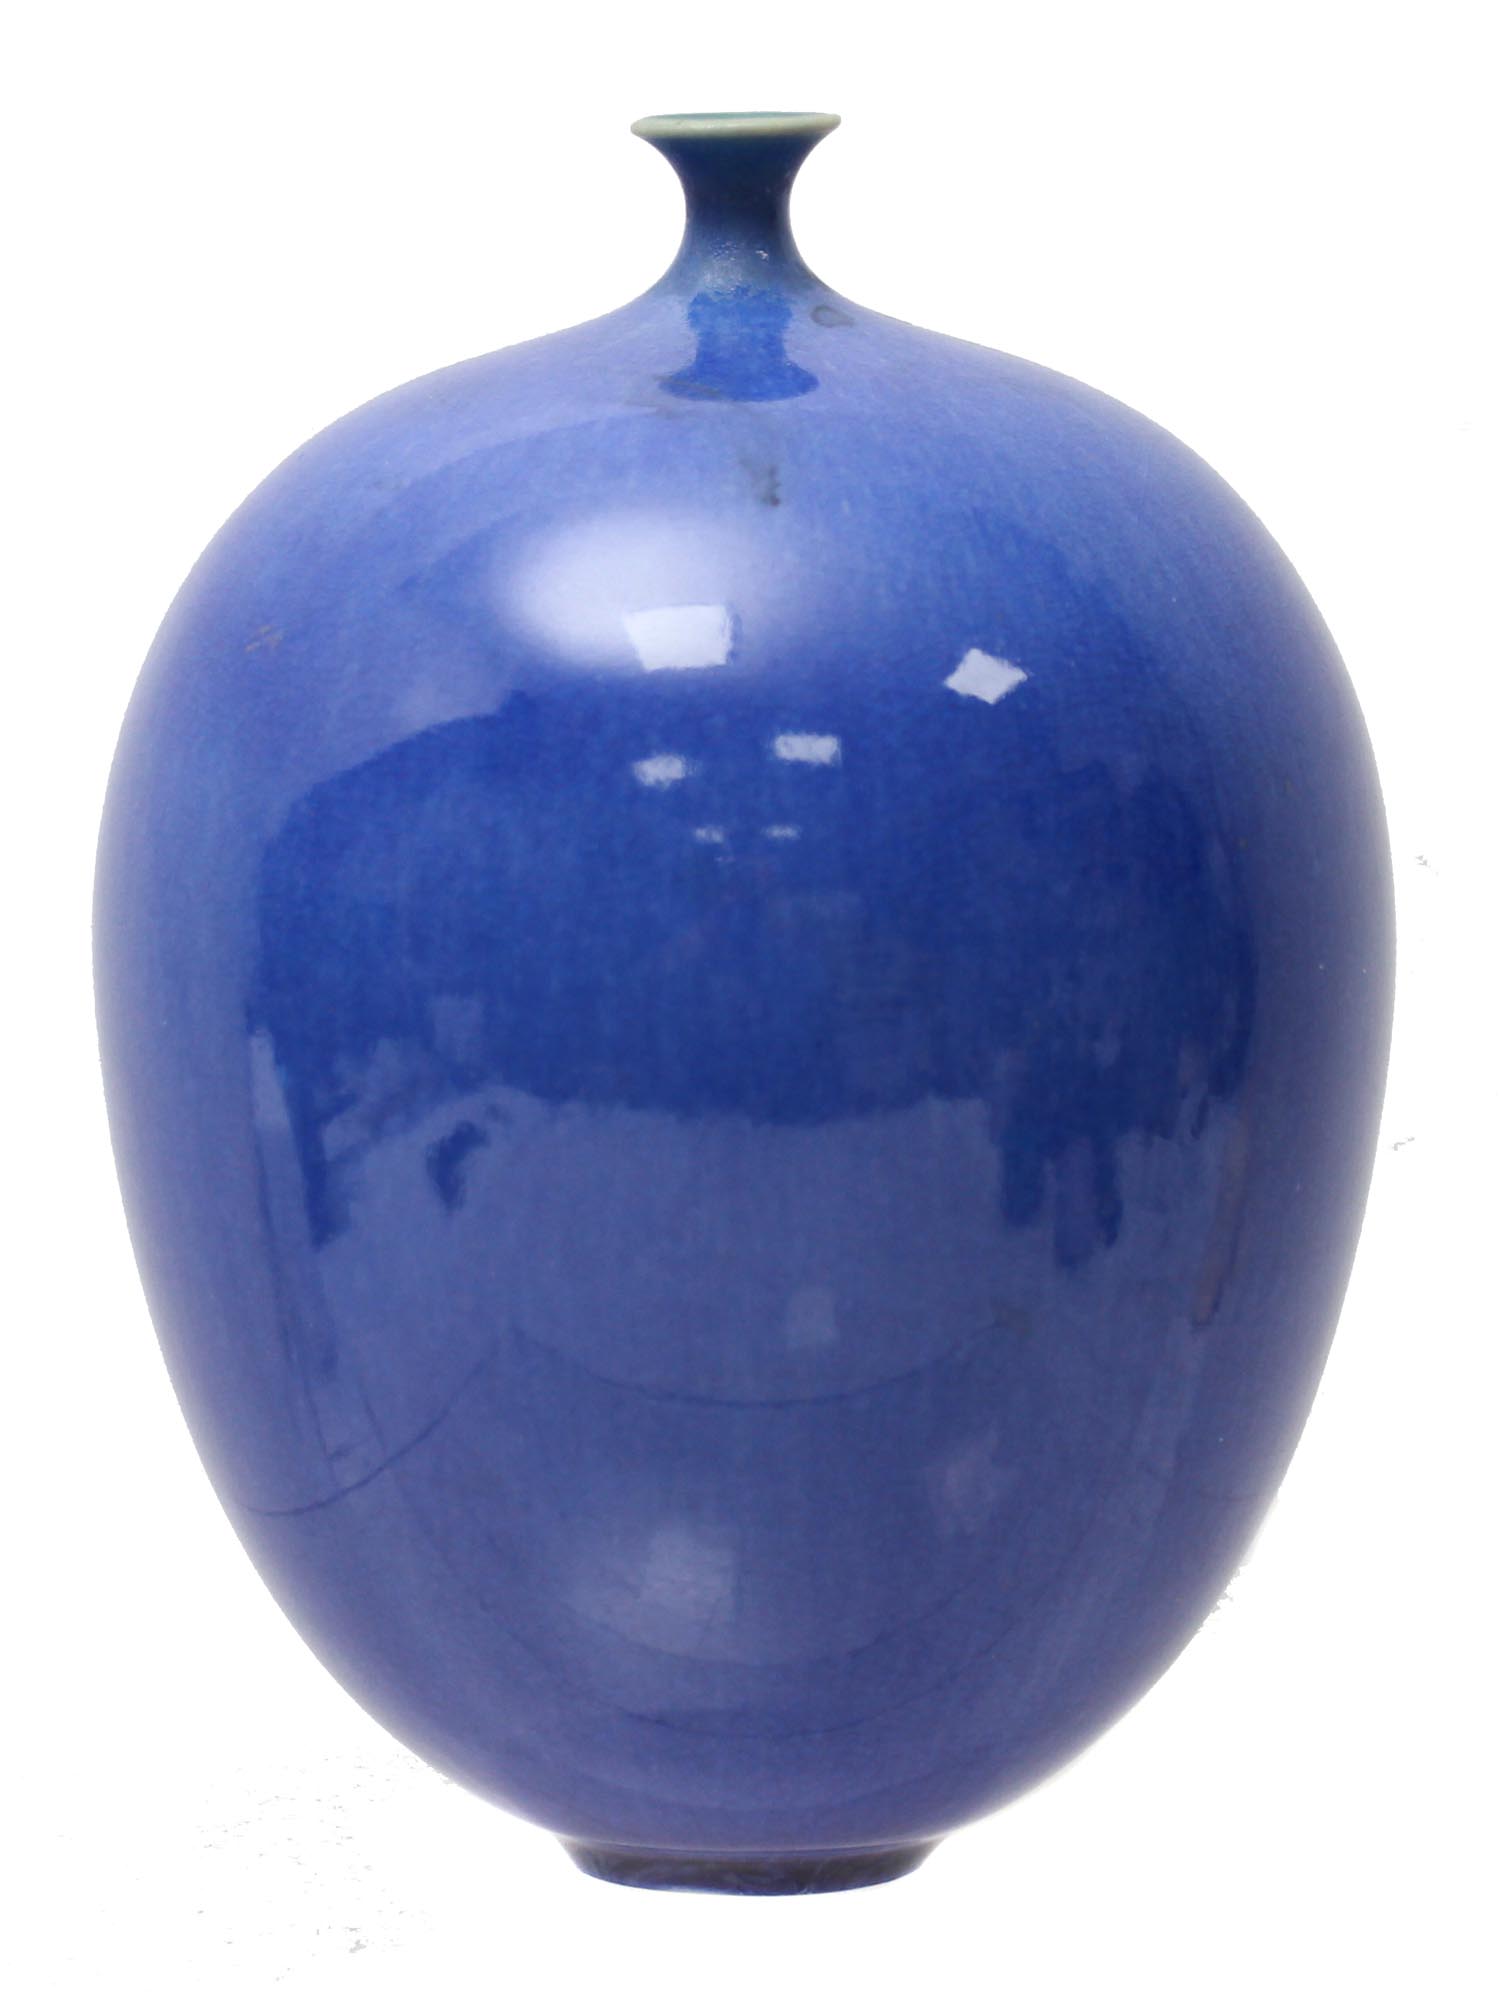 A CONTEMPORARY GLAZED ART POTTERY VASE BY IHRMAN PIC-1